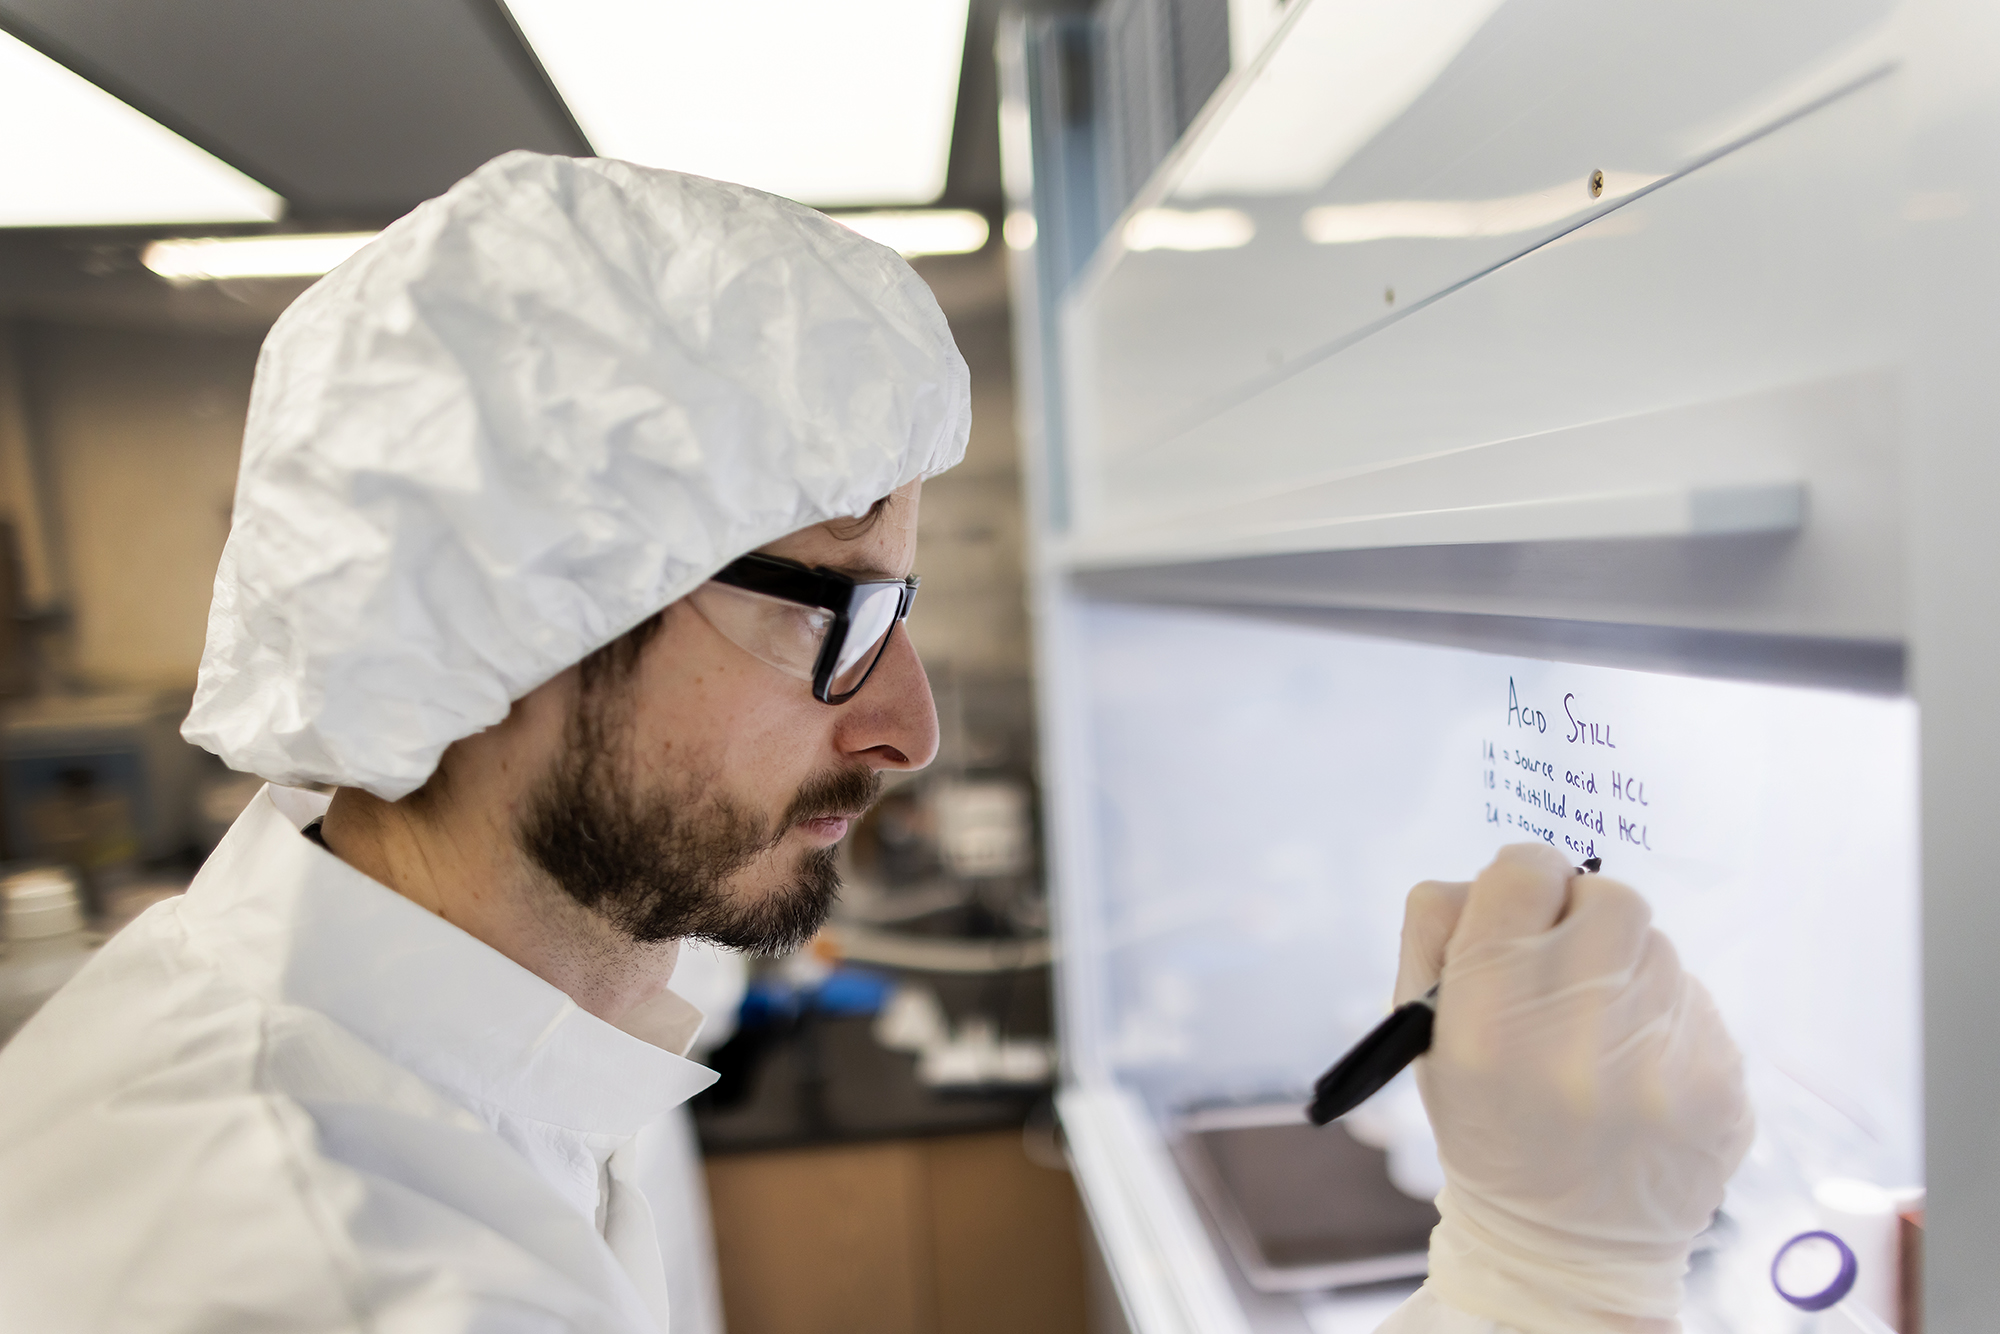 Scientist with protective cap, glasses, gloves, and jacket writes on a glass laboratory hood